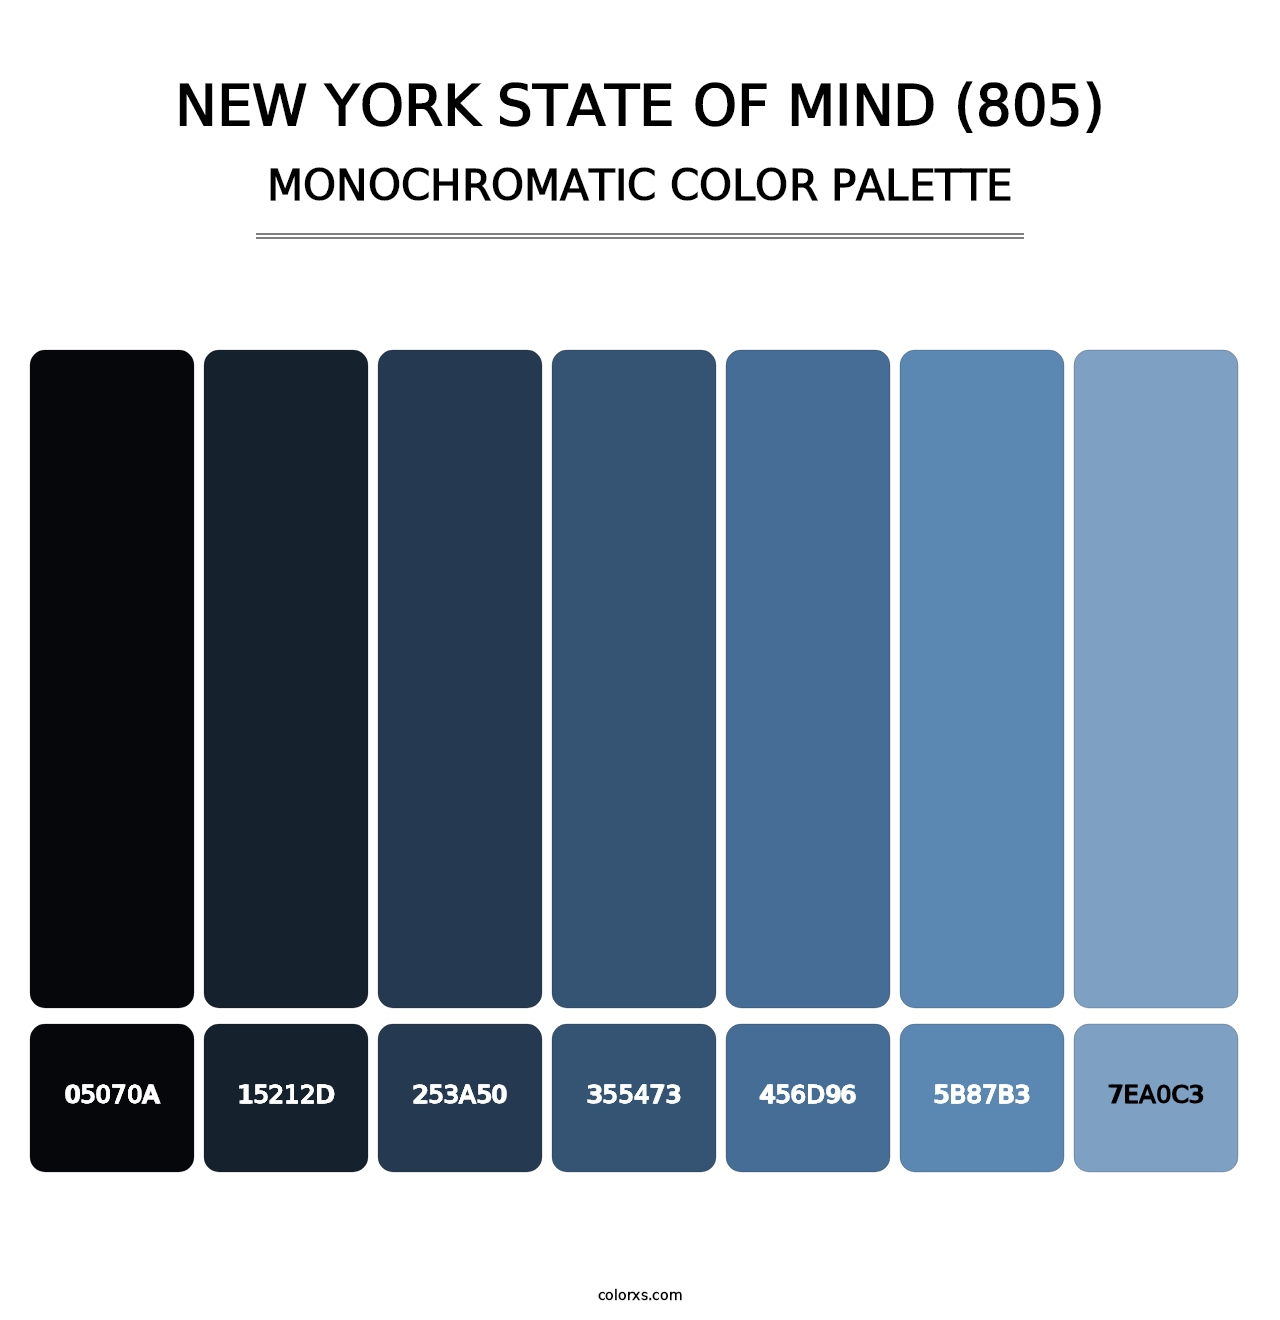 New York State of Mind (805) - Monochromatic Color Palette